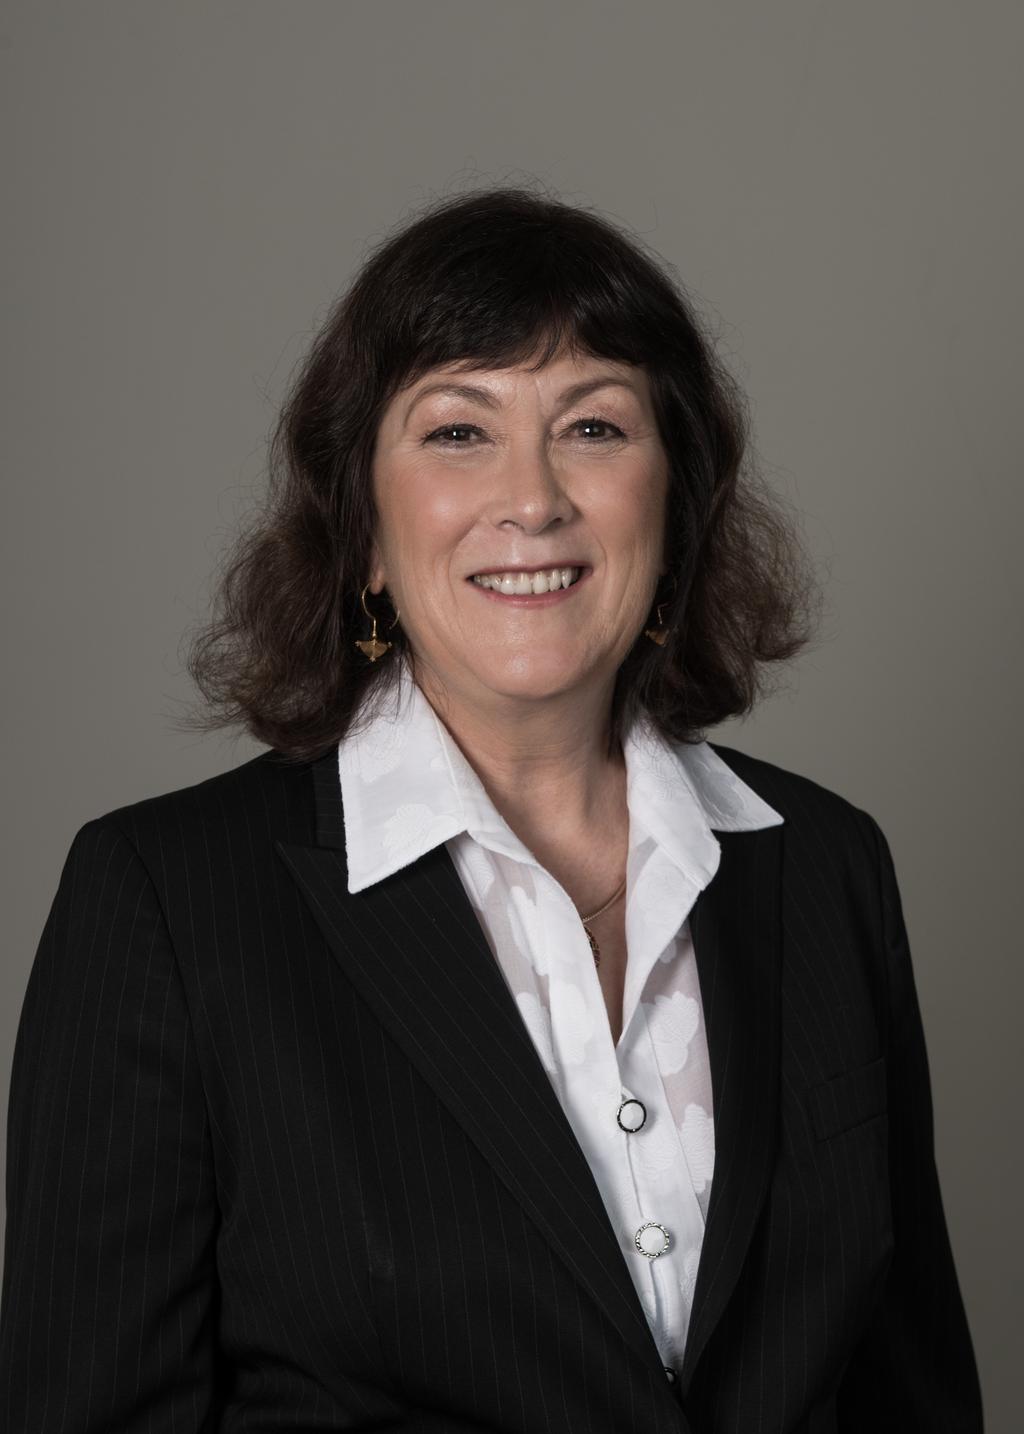 KIM M ROONEY CURRICULUM VITAE Kim Rooney is an international arbitrator and barrister. She has been practicing in Asia, based in Hong Kong, since 1990.